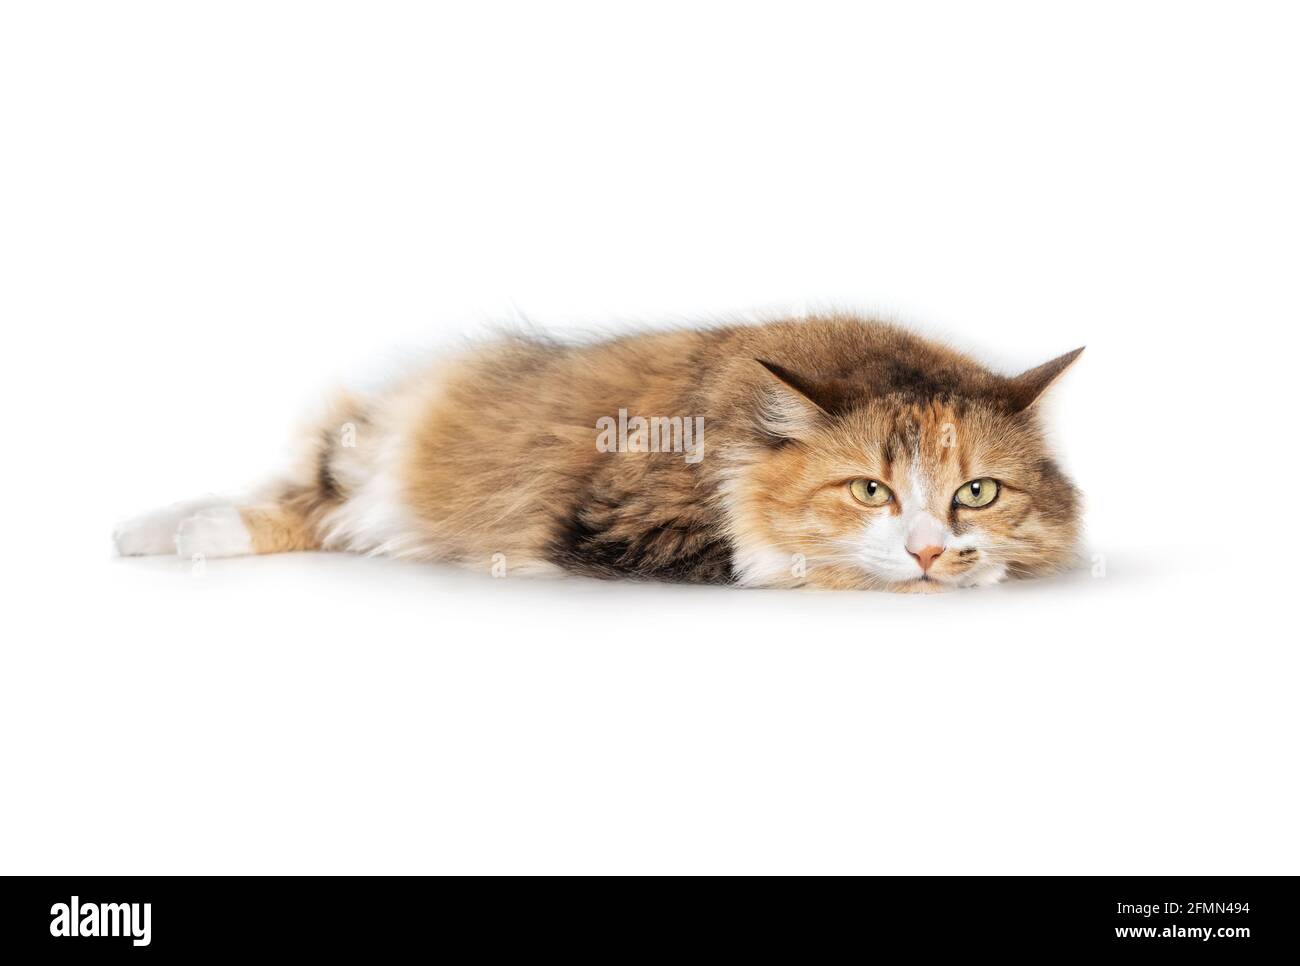 Cat looking at camera with head on front paws while lying sideways. Fluffy torbie female kitty with striking face markings and yellow eyes. Bored or r Stock Photo